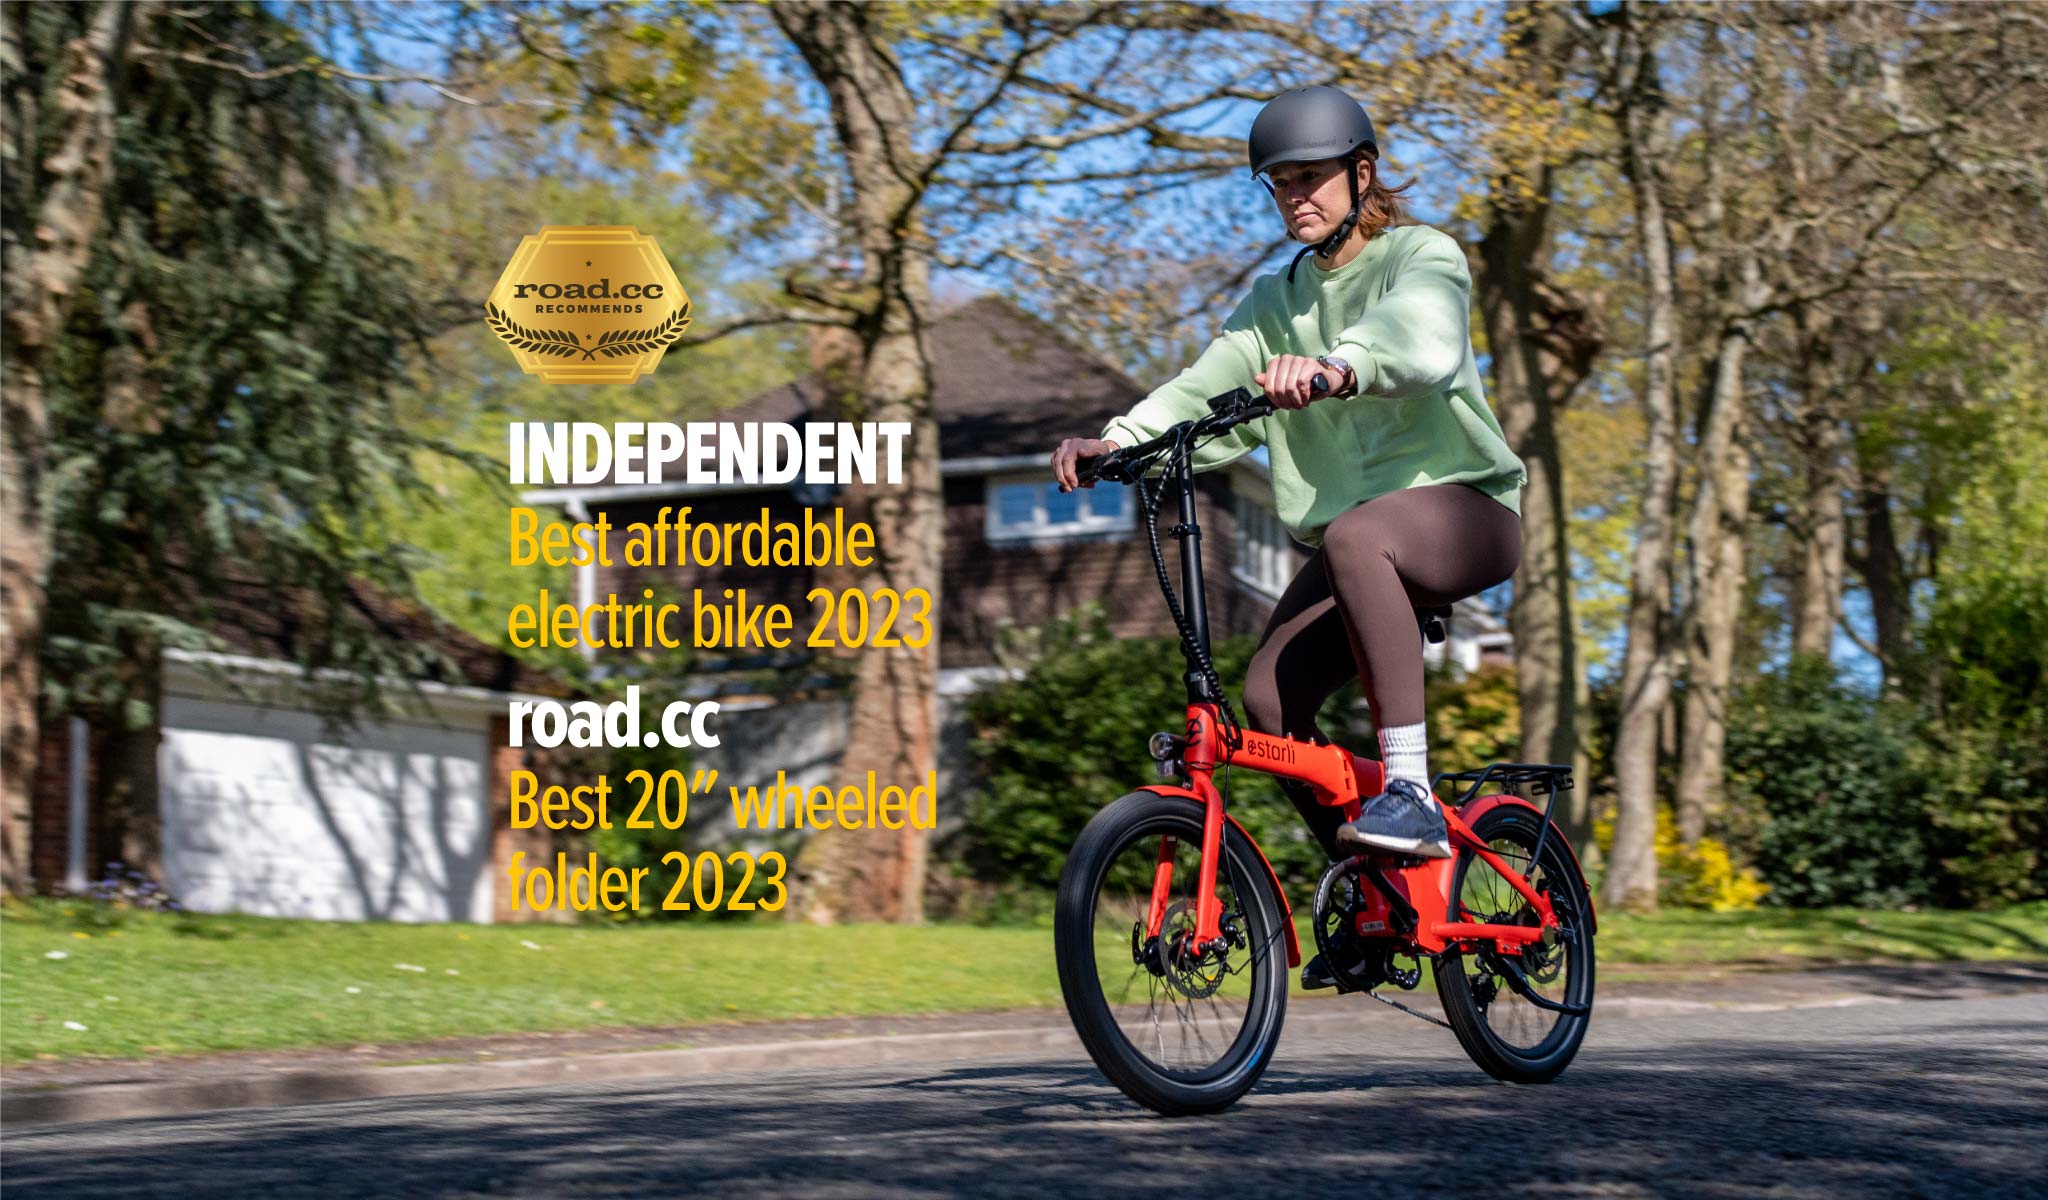 The award-winning estarli e20.7. Named 'Best affordable electric bike in 2023' by The Independent Newspaper and 'Best 20 inch wheeled folder in 2023' by Roadcc magazine.